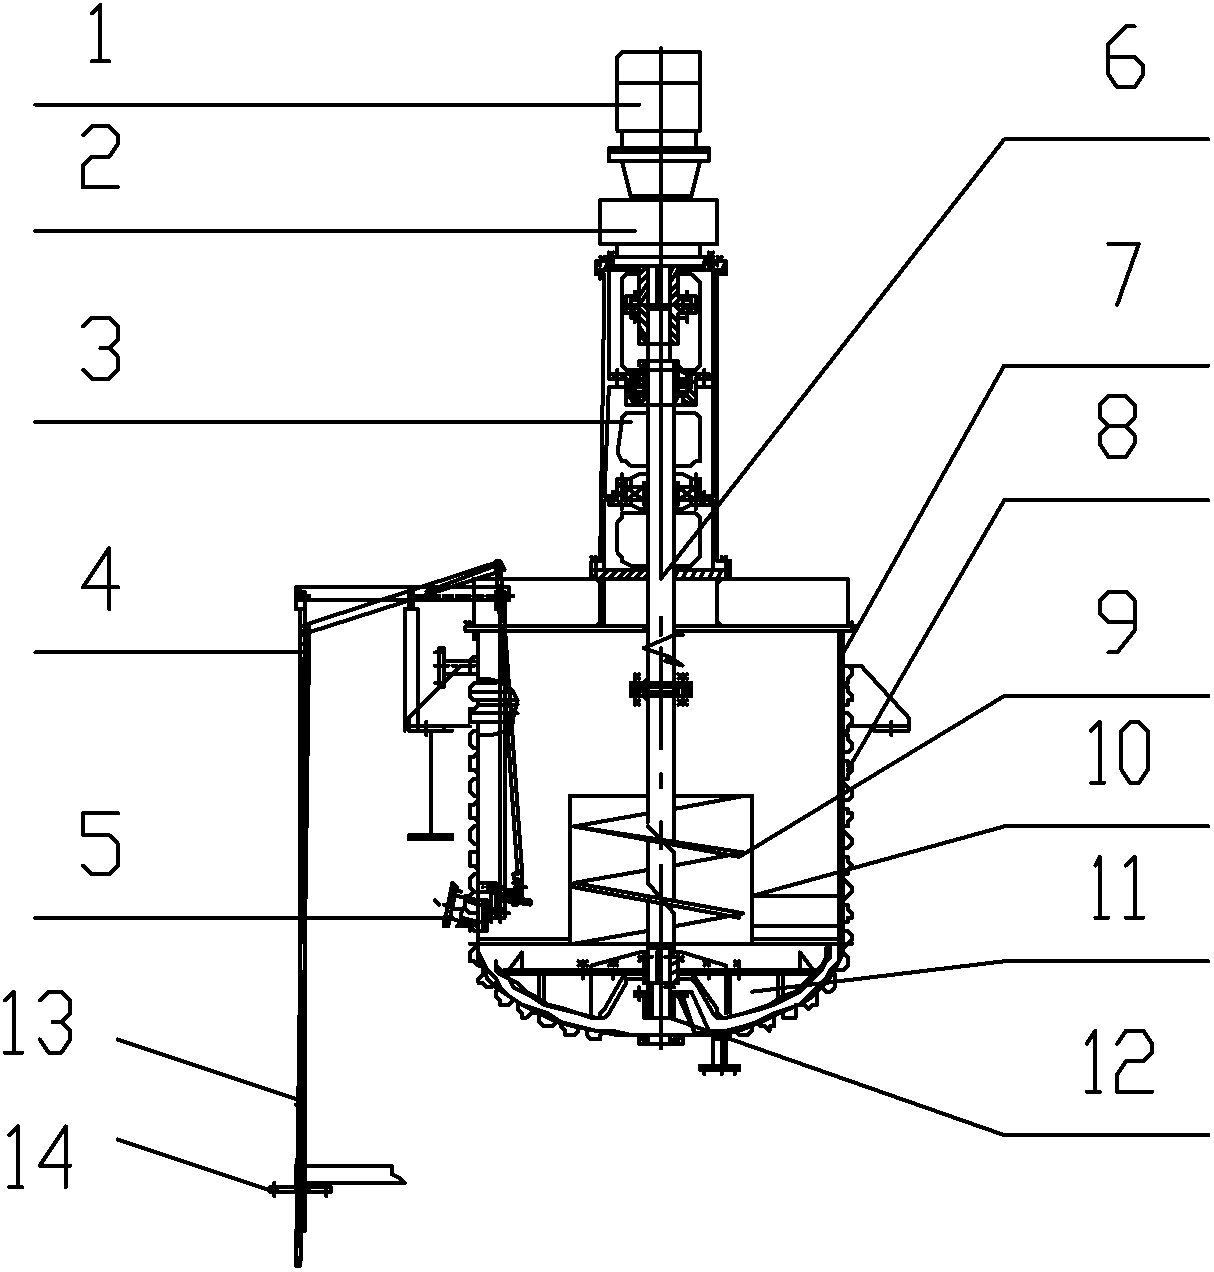 Fusing and mixing device